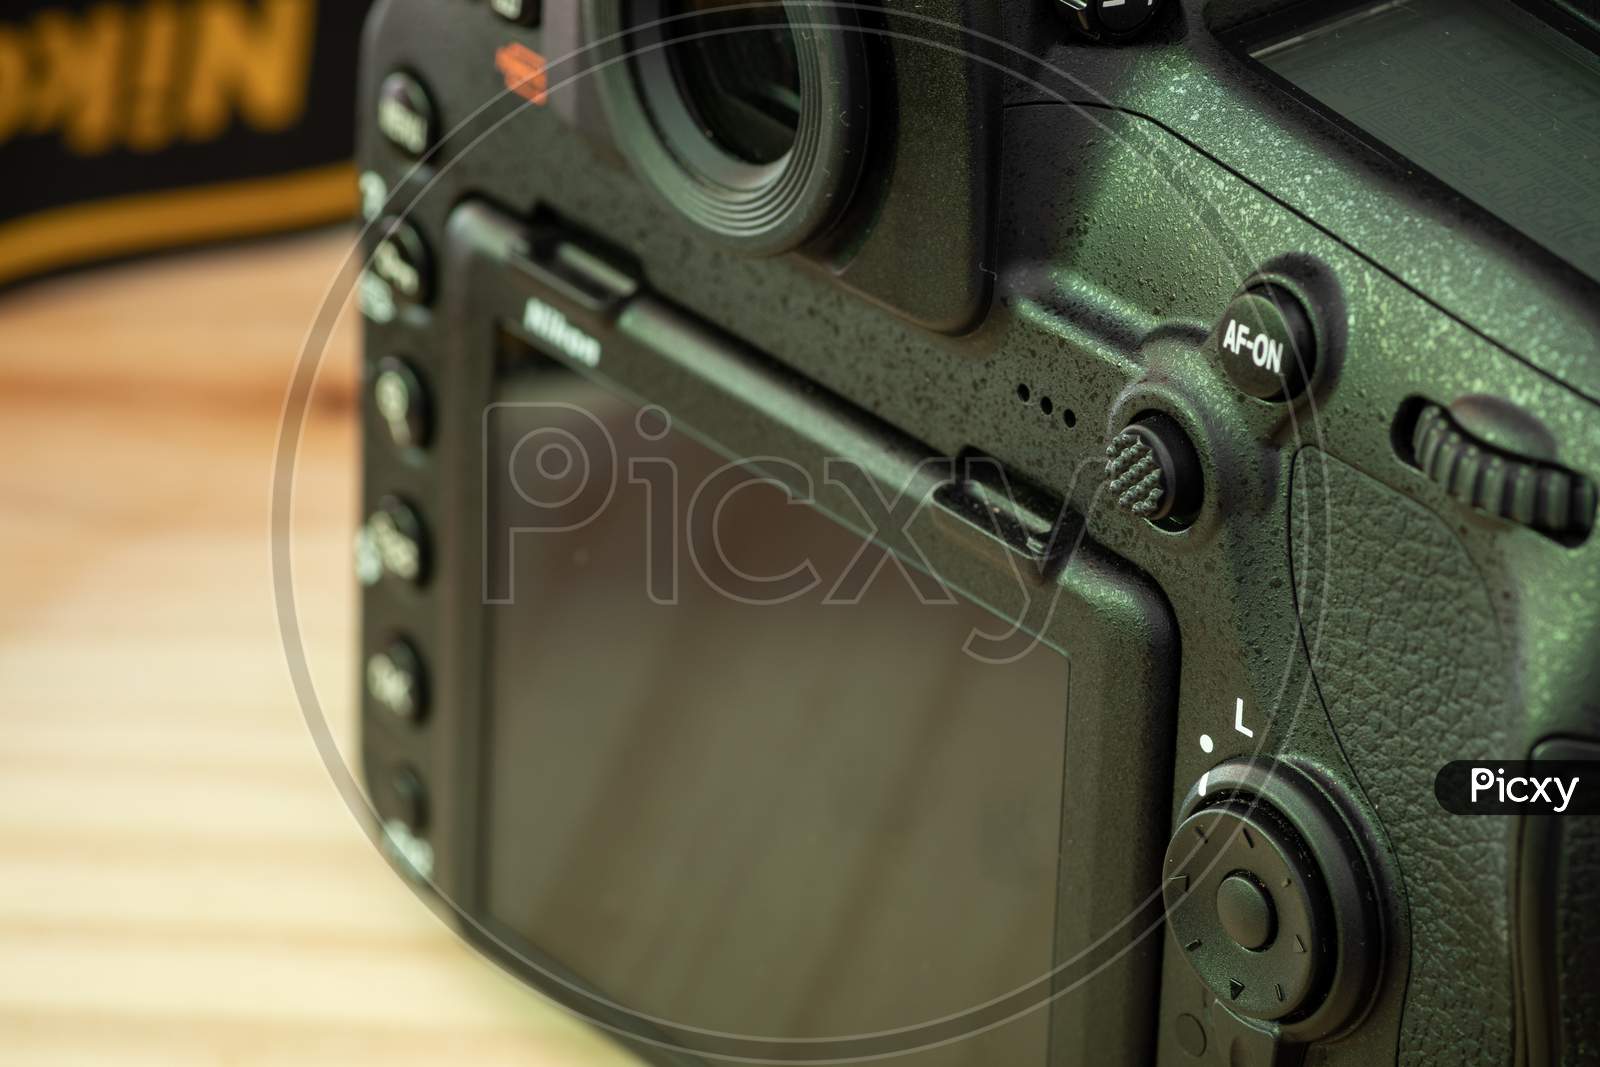 Modern Dslr Touch Display And Viewfinder With Back Dials In Focus, Build With Extremely Durable Rugged Magnesium Alloy And Carbon Fiber Materials.